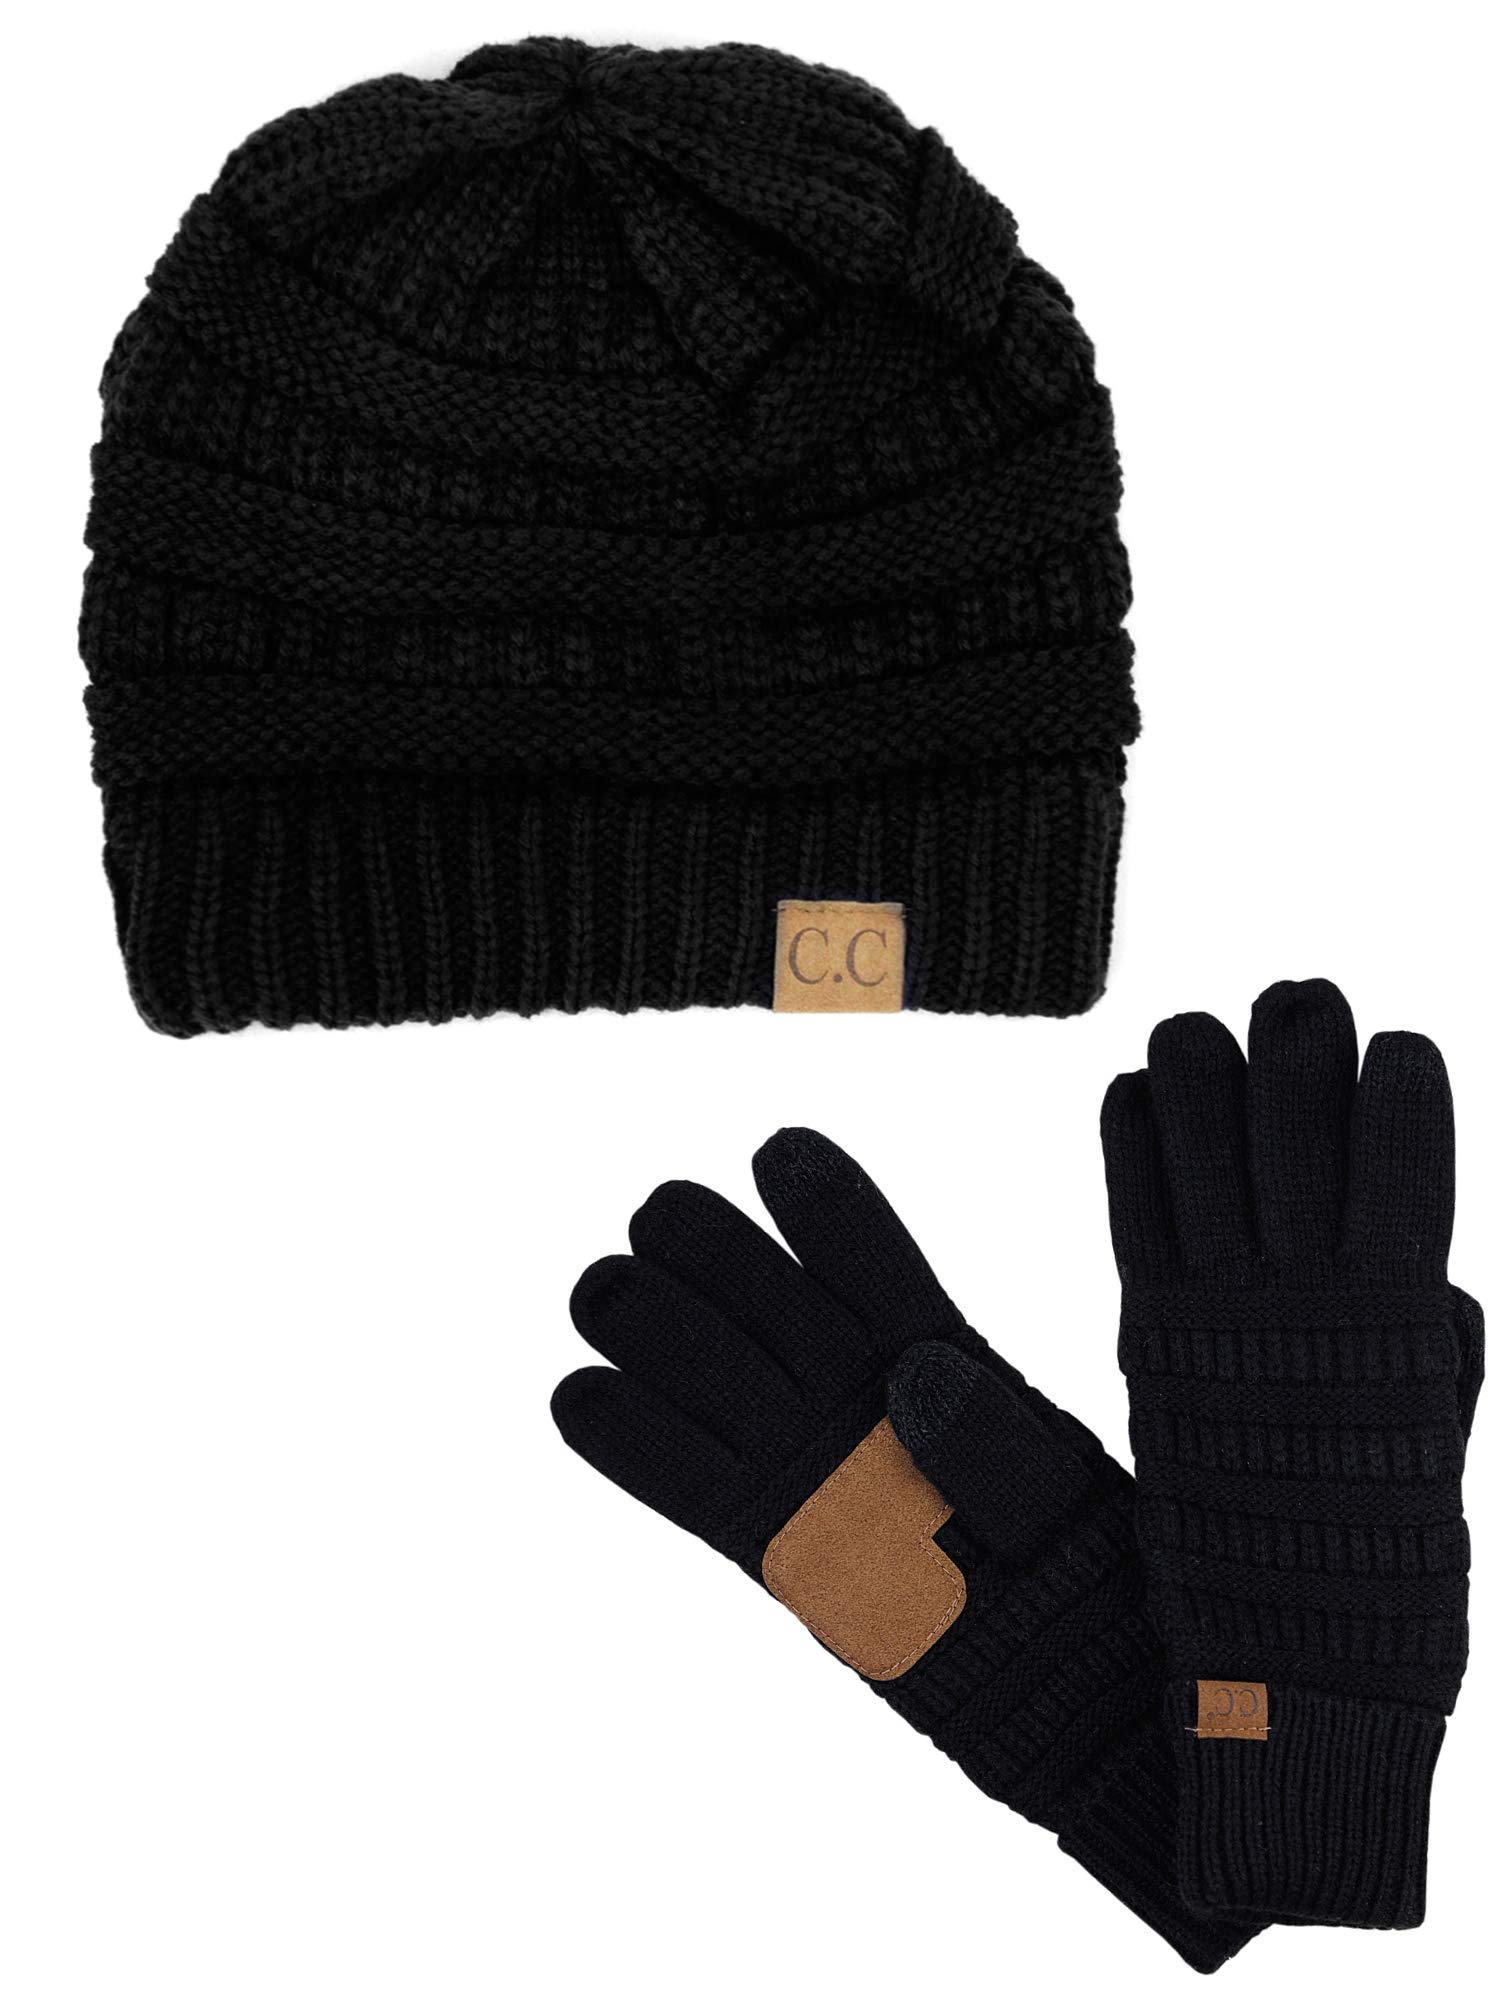 C.C Unisex Soft Stretch Cable Knit Beanie and Anti-Slip Touchscreen Gloves 2 Pc Set, Black